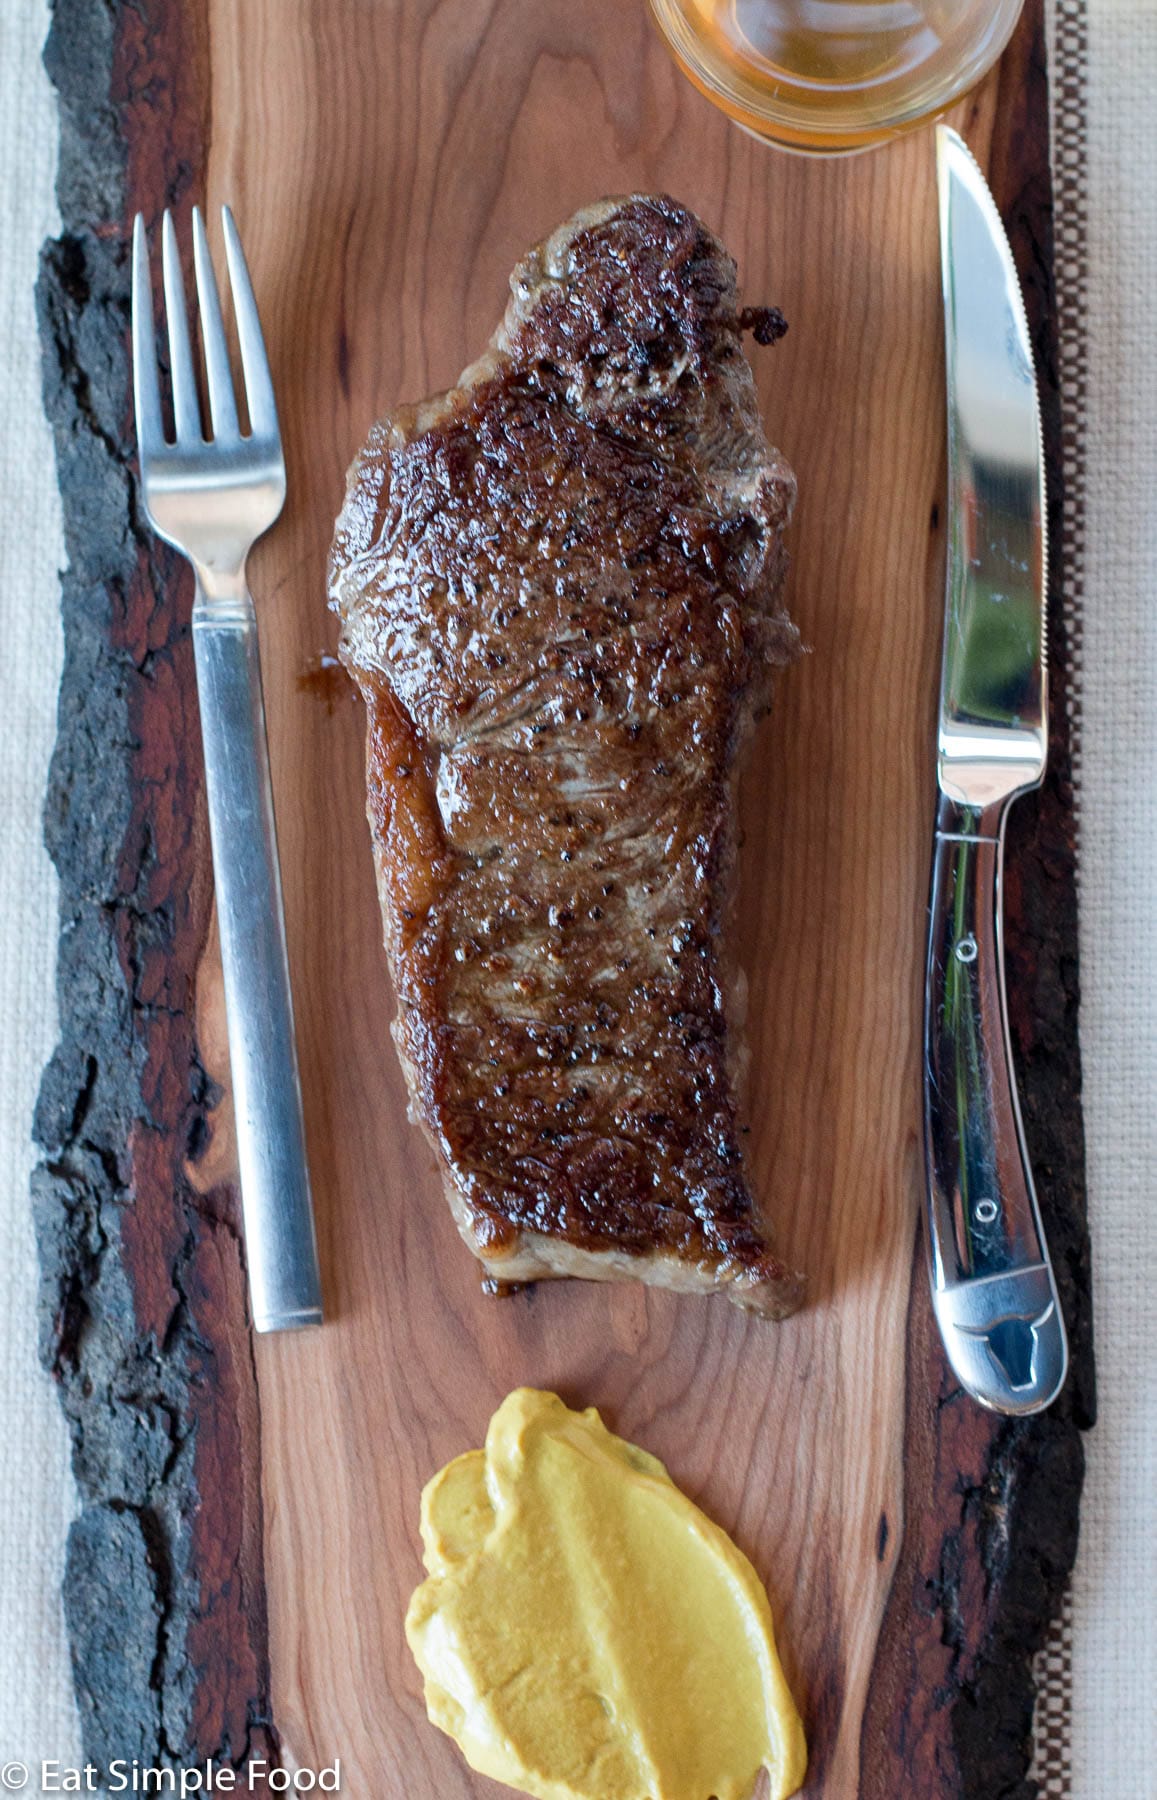 New York Strip Steak golden brown on a wood cutting board with a lived edge. fork on the left. steak knife on the right. sharp yellow mustard beneath.